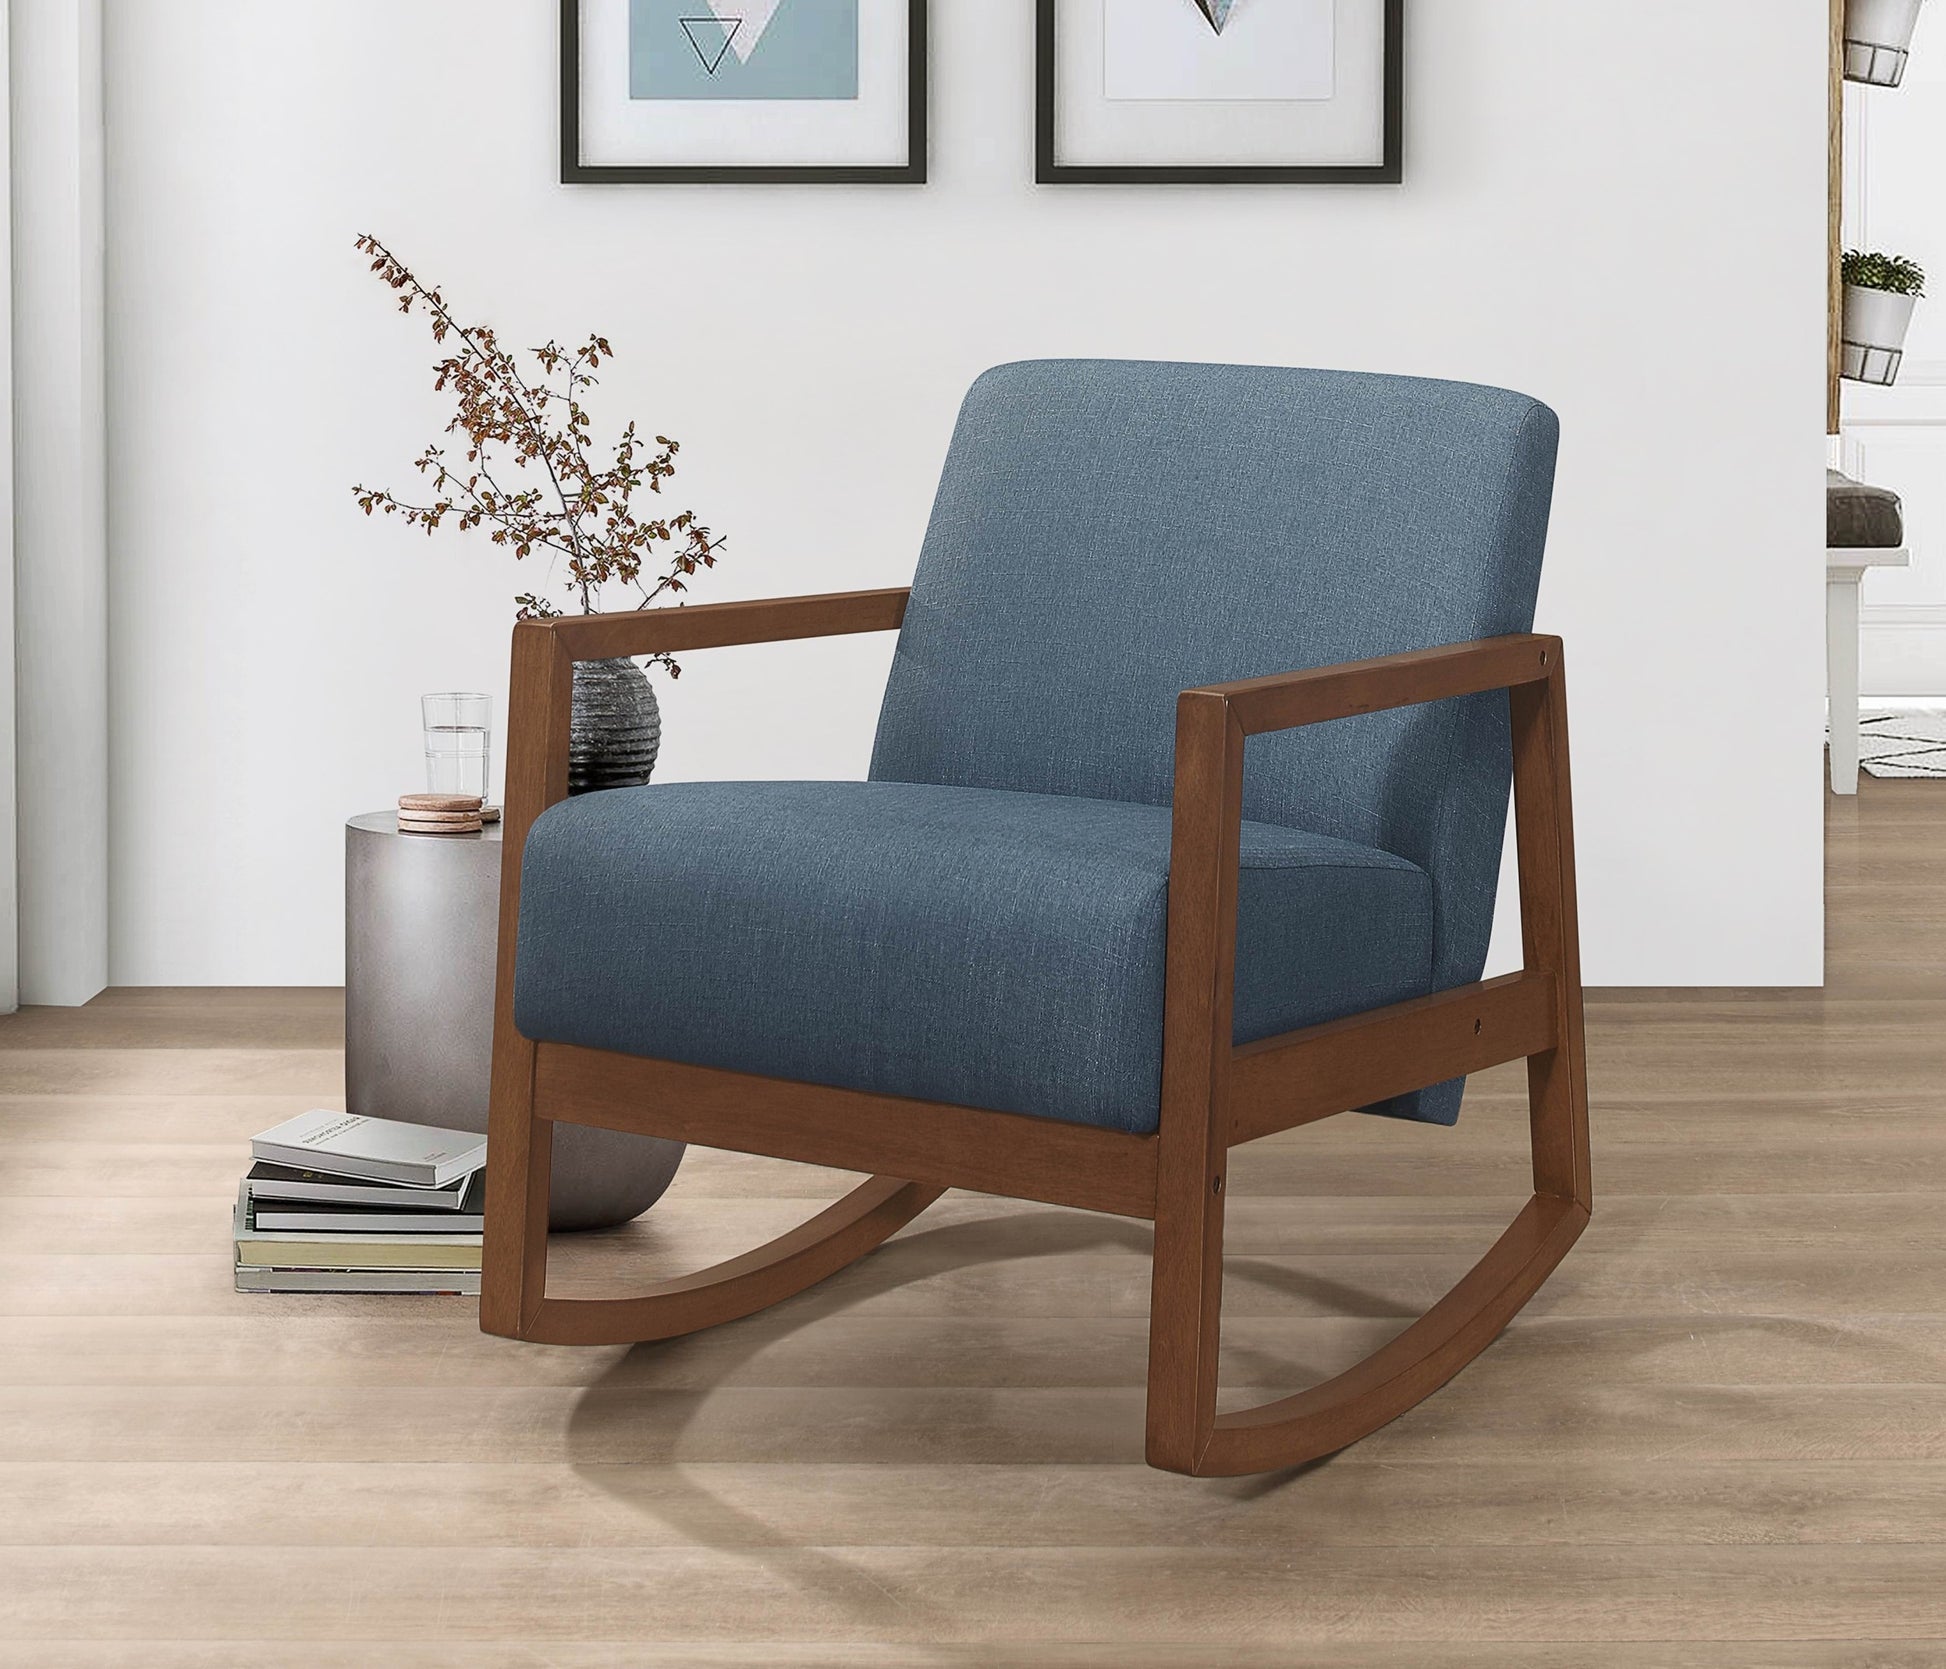 1pc Rocker Accent Chair Modern Living Room Plush blue-primary living space-modern-solid wood